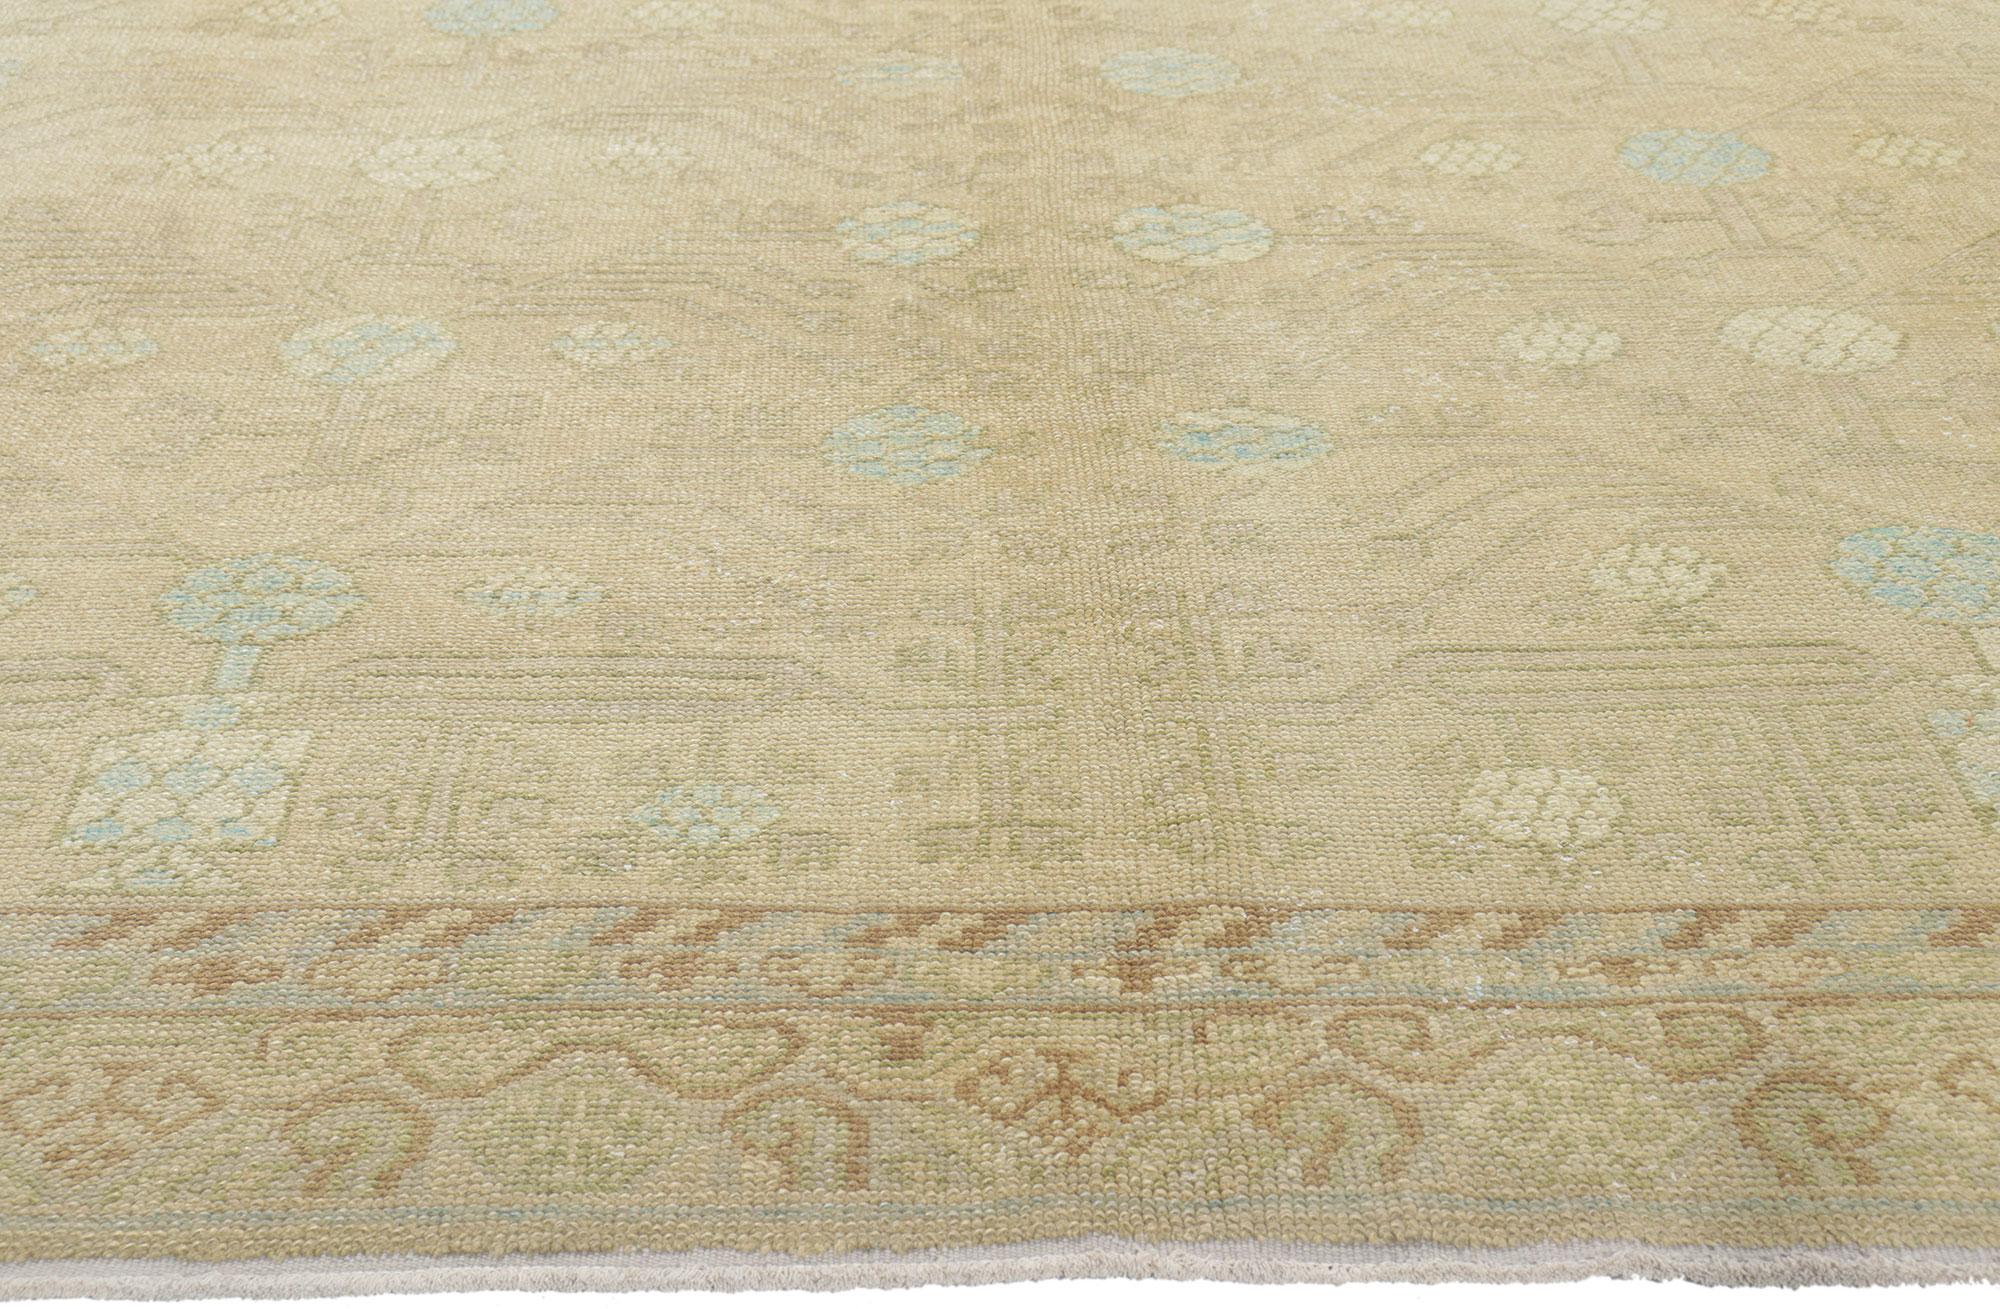 New Soft Earth-Tone Turkish Khotan Rug In New Condition For Sale In Dallas, TX